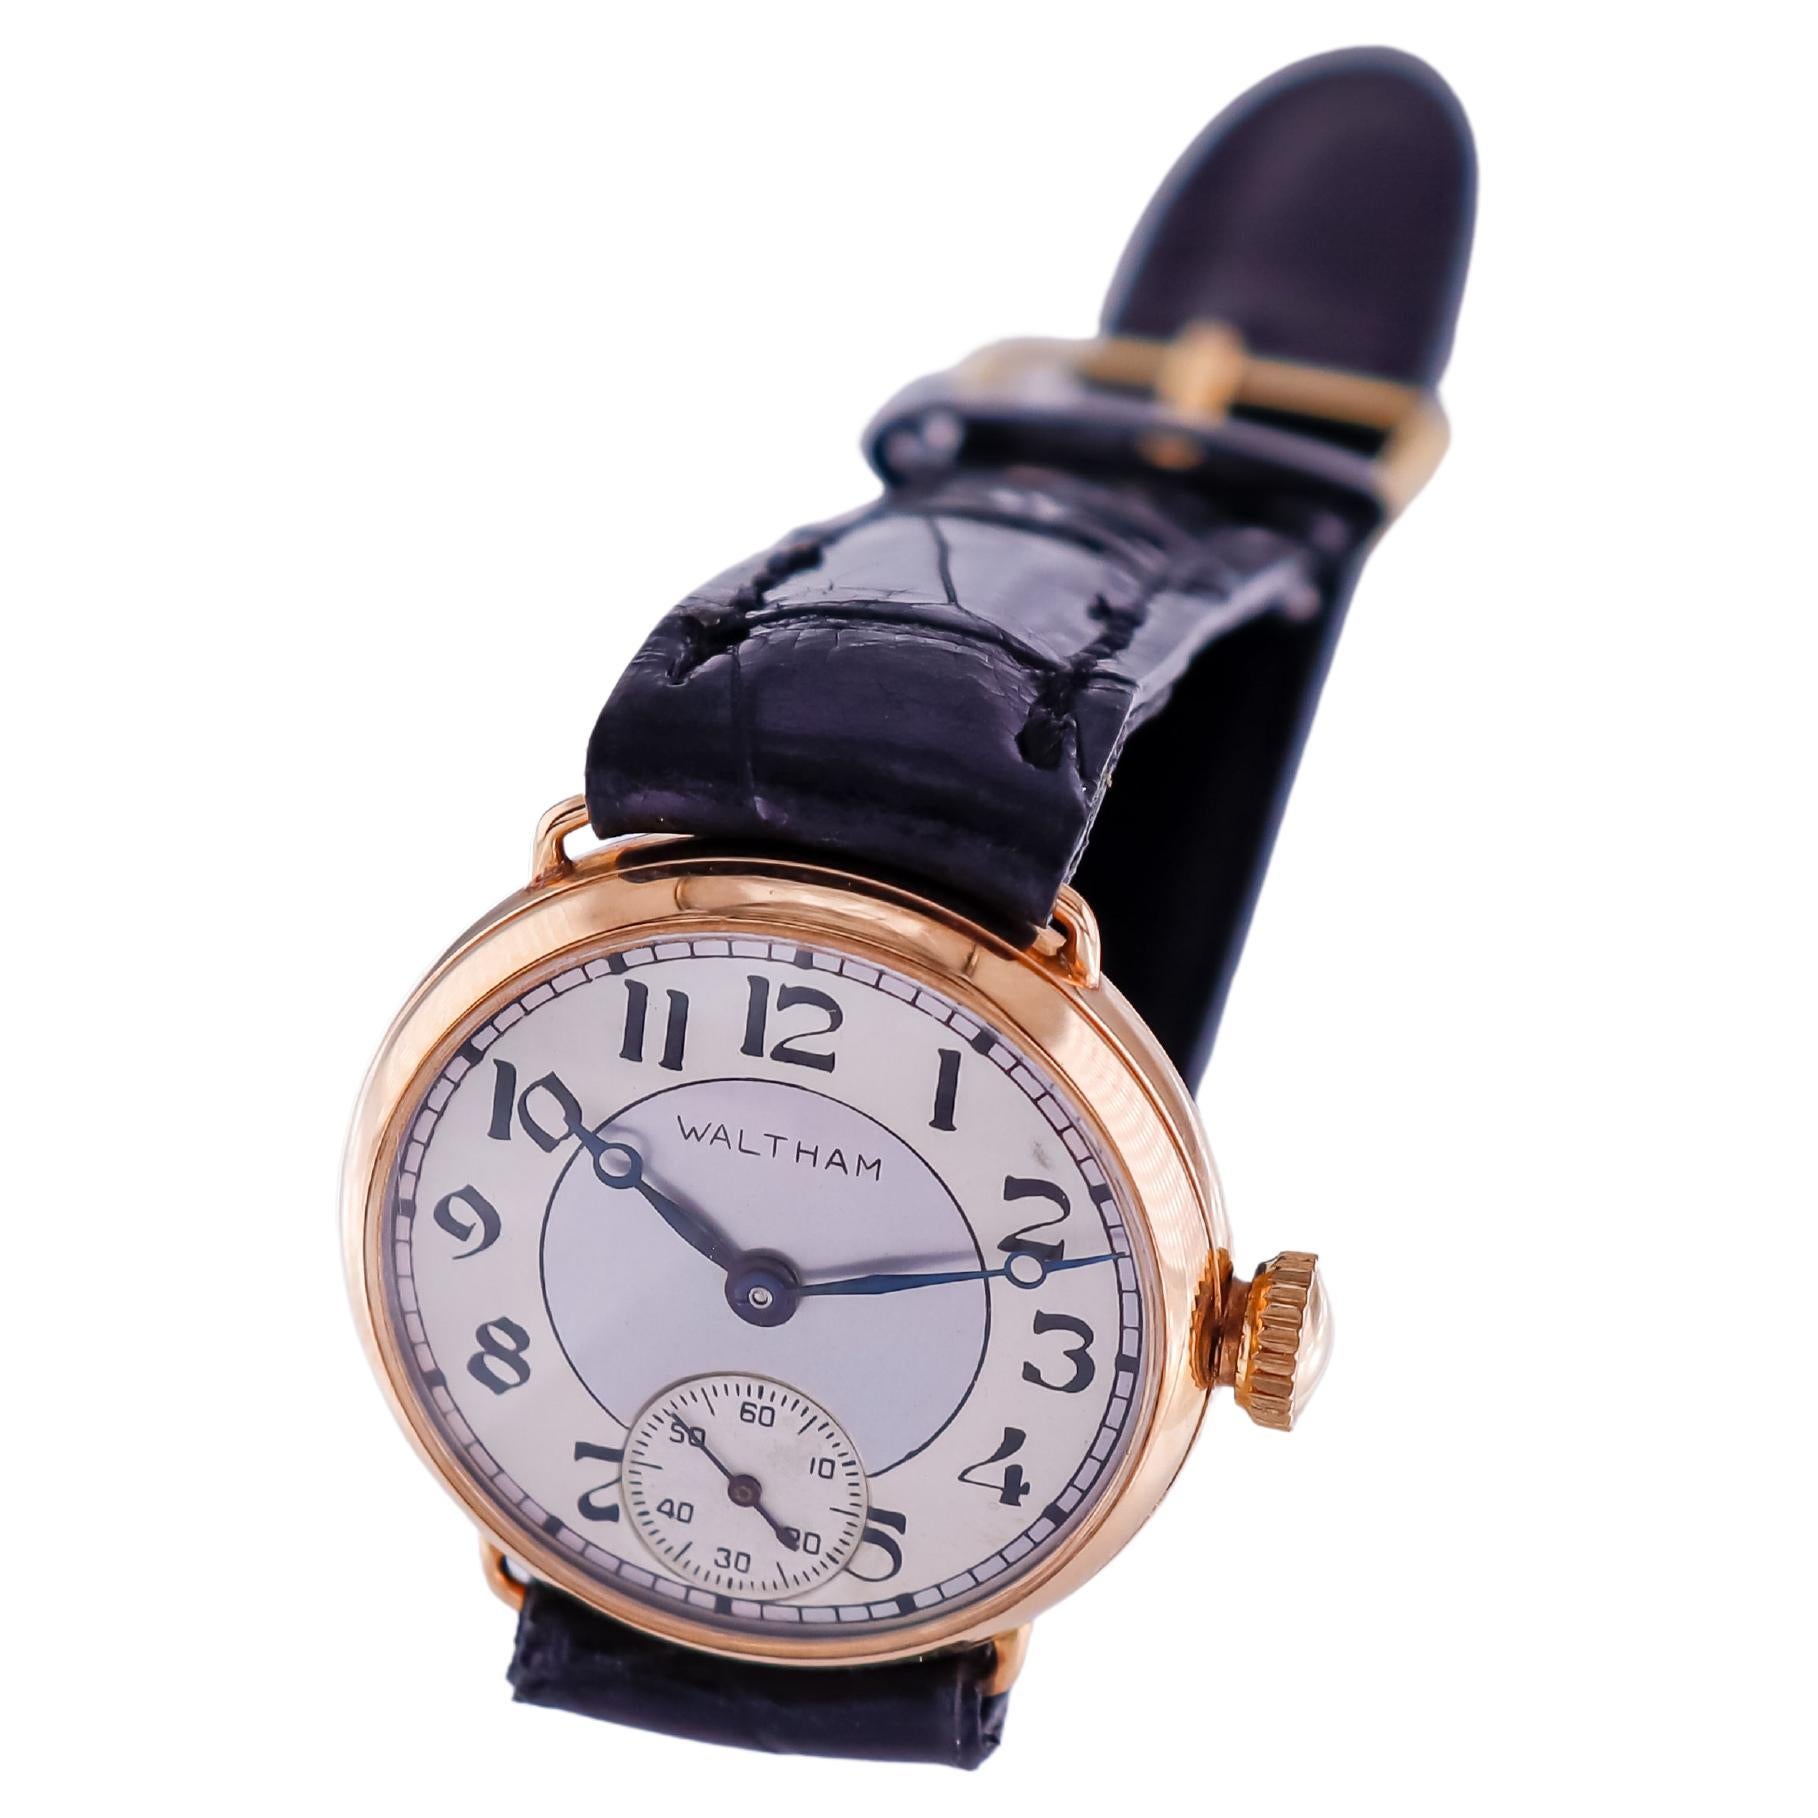 Women's or Men's Waltham 14 Karat Yellow Gold Art Deco Campaign Style Watch One Hundred Years Old